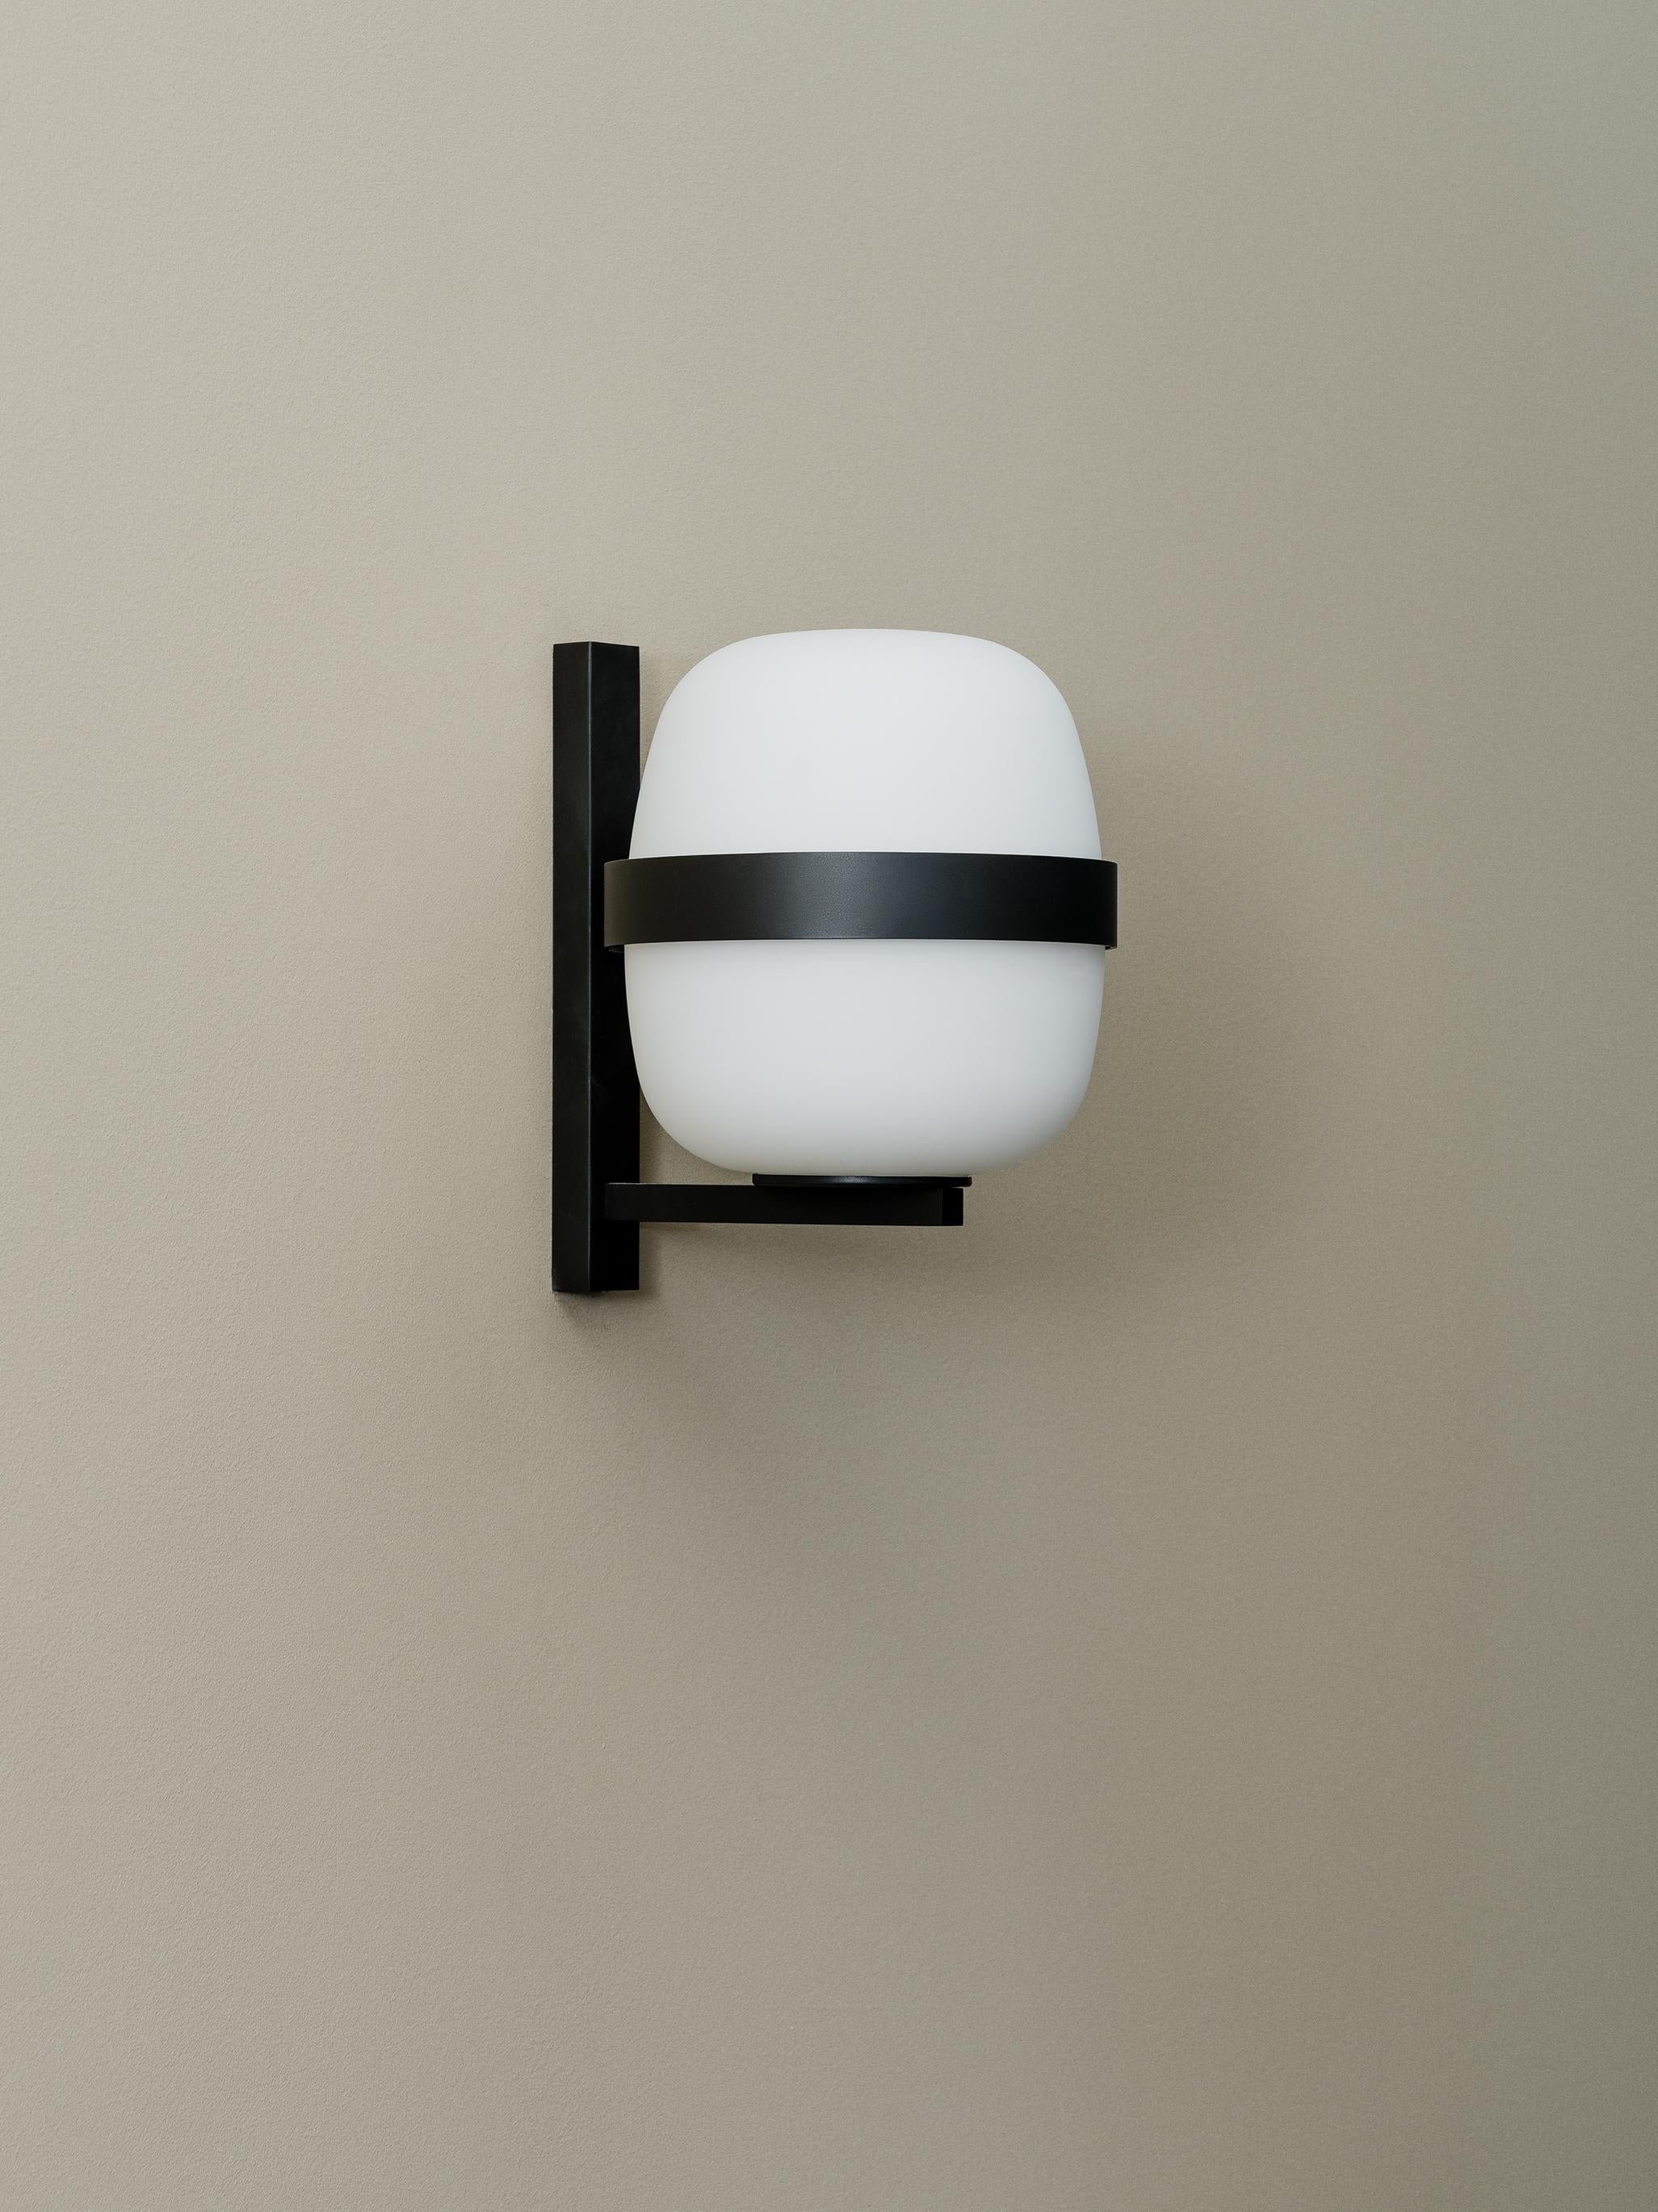 Black Wally wall lamp by Miguel Milá
Dimensions: D 18.4 x W 10 x H 24 cm
Materials: Metal, glass.
Also available in white.

In the Wally lamp, the iconic globe-shaped shade from the Cesta family is supported by a metallic ring in white or